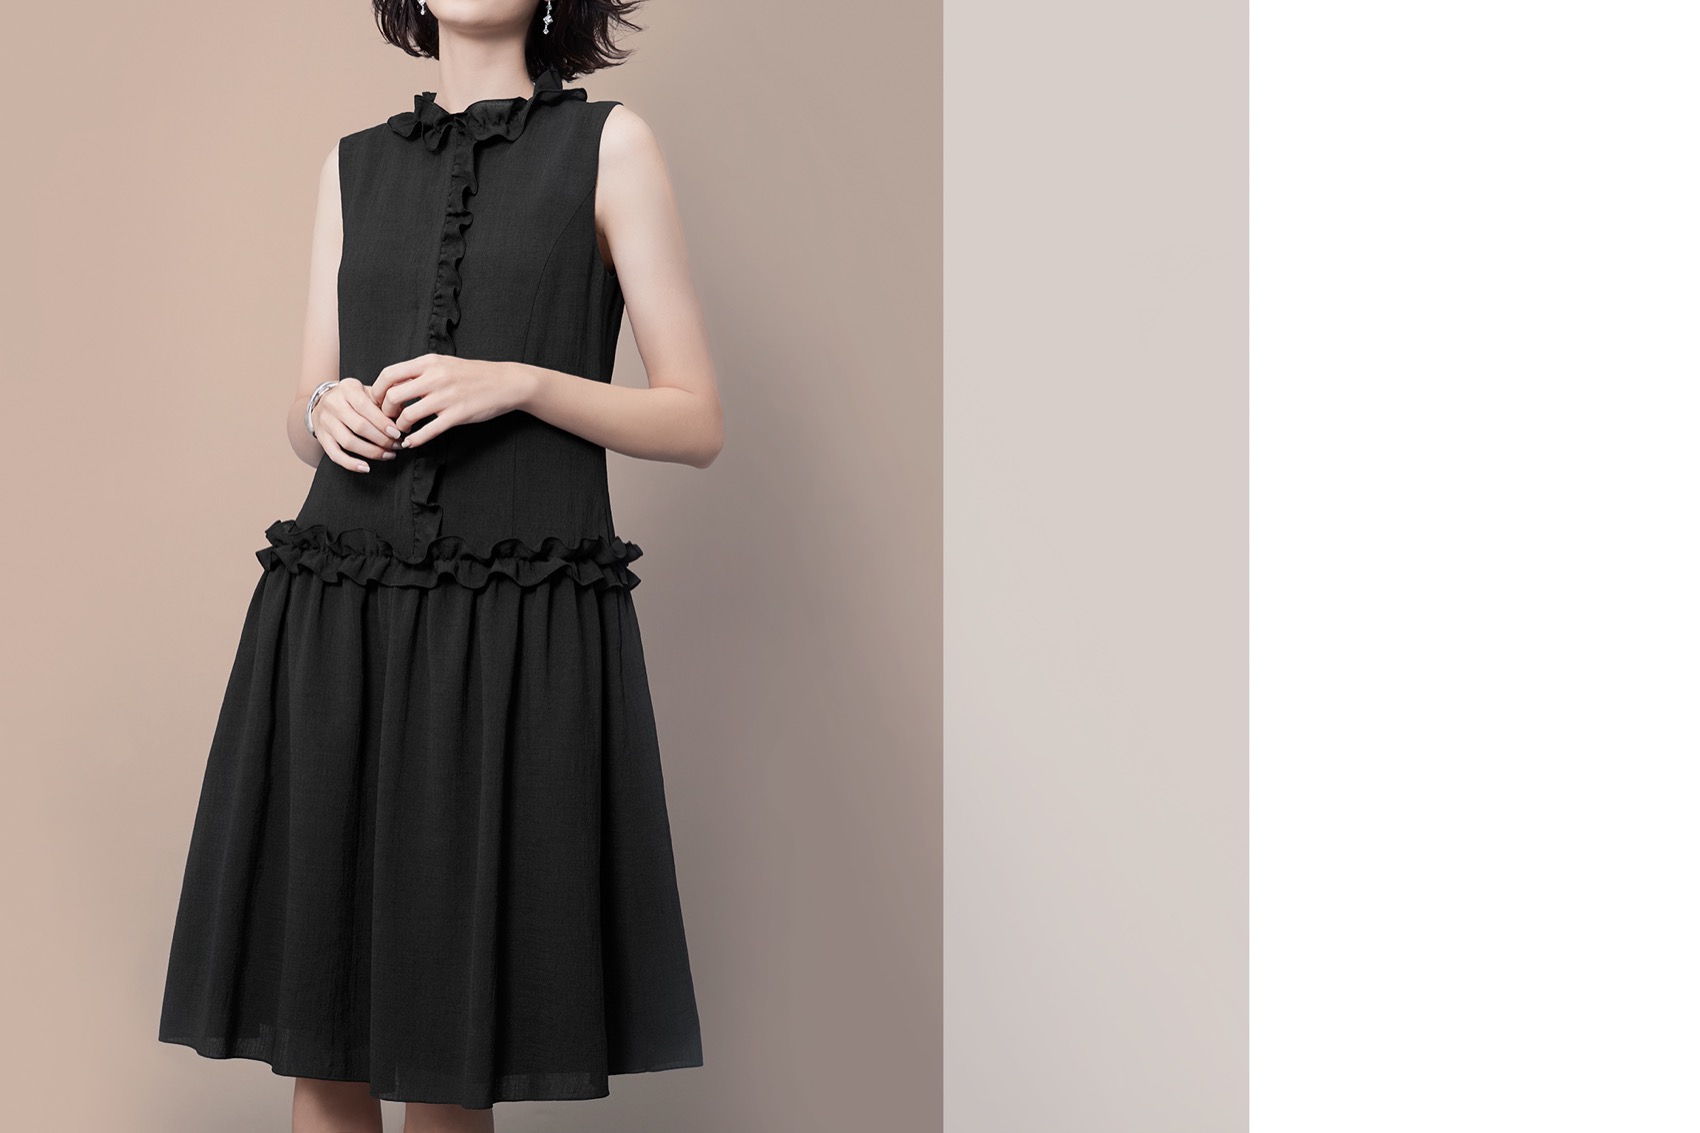 DAISY LIN | Official website and Online Boutique / Dress "Frill Lady" (Black)